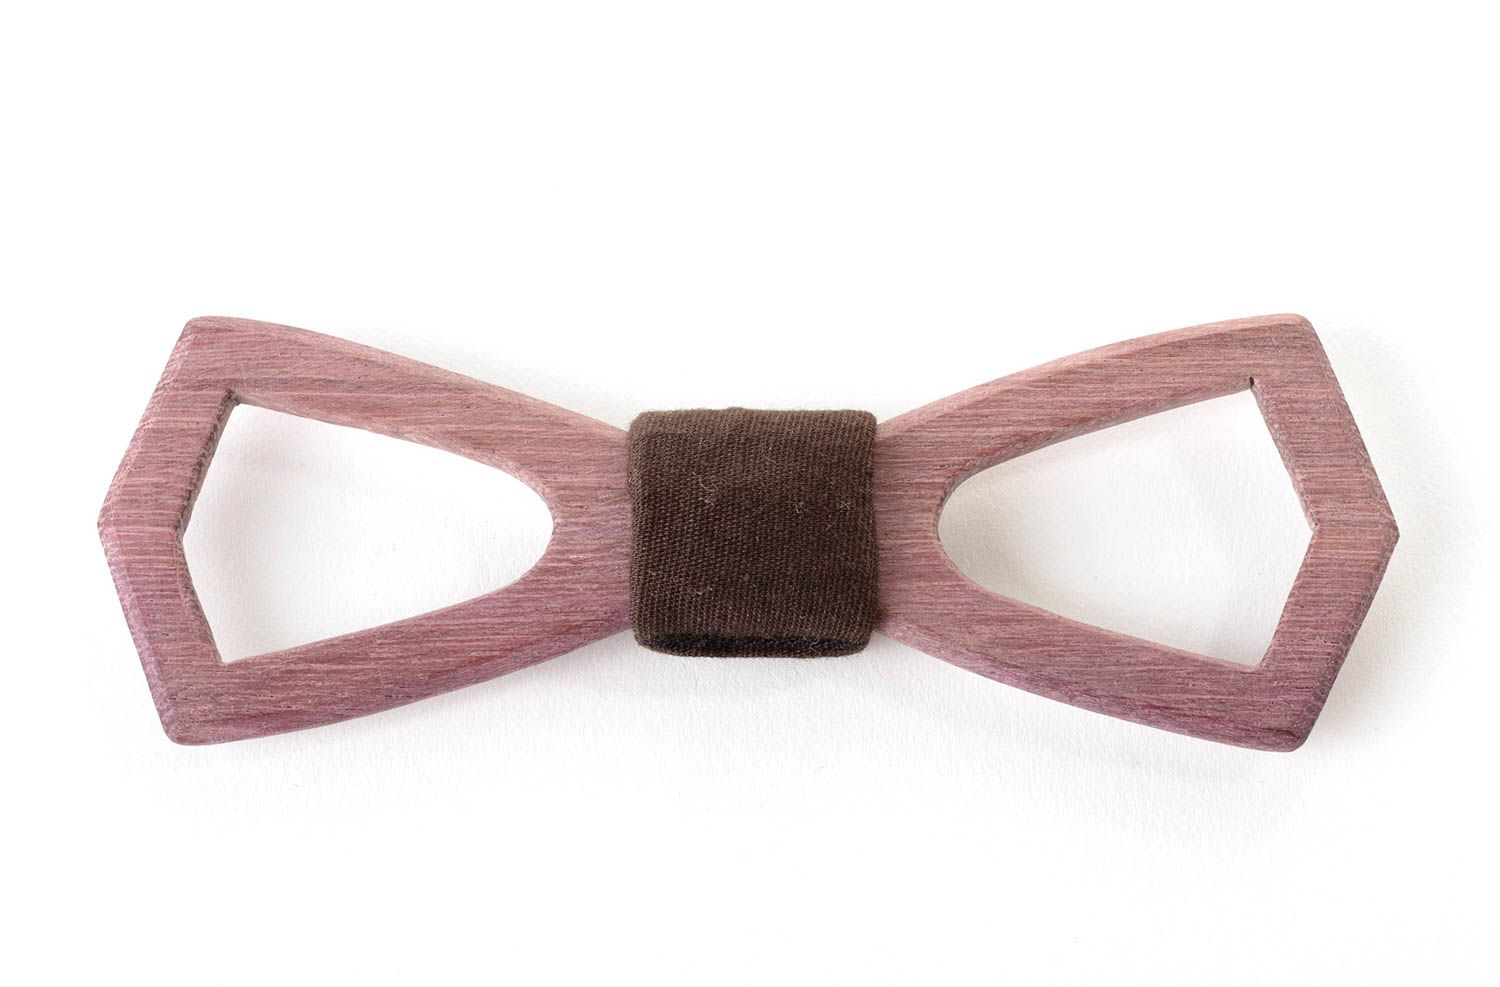 Handmade bow tie for men amaranth wood bow tie wooden bow tie stylish bow tie photo 4